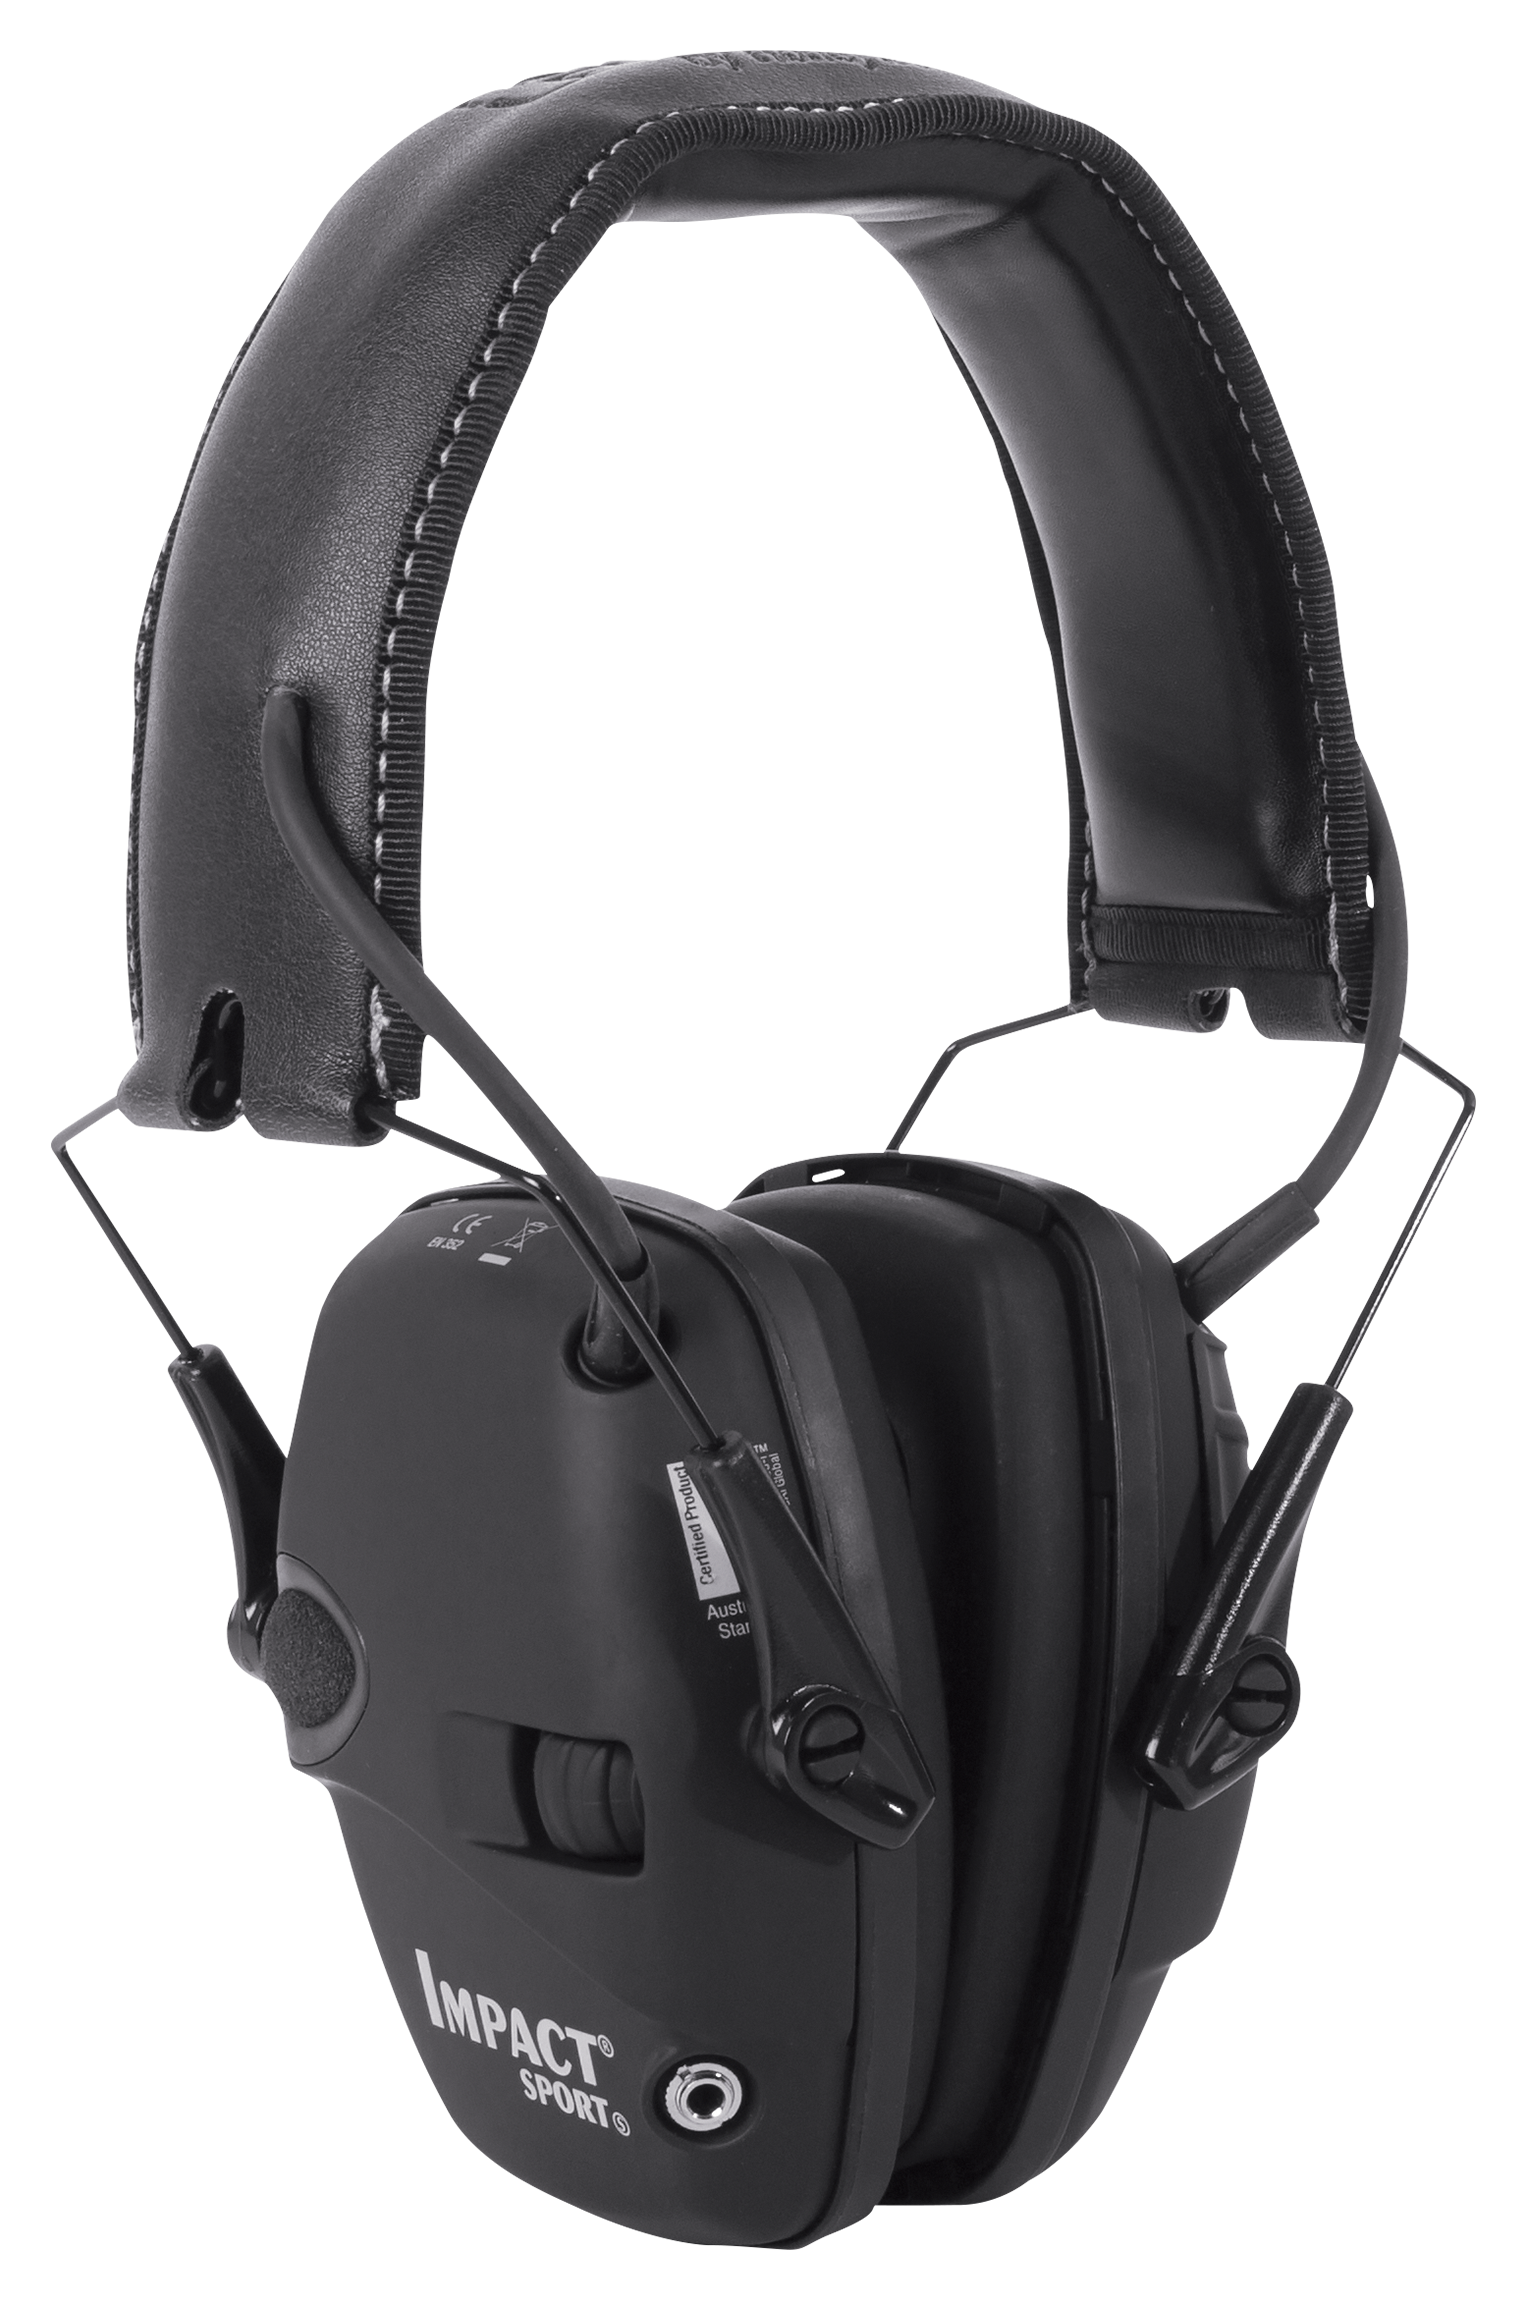 Howard Leight Impact Sport - Active capsule hearing protection for